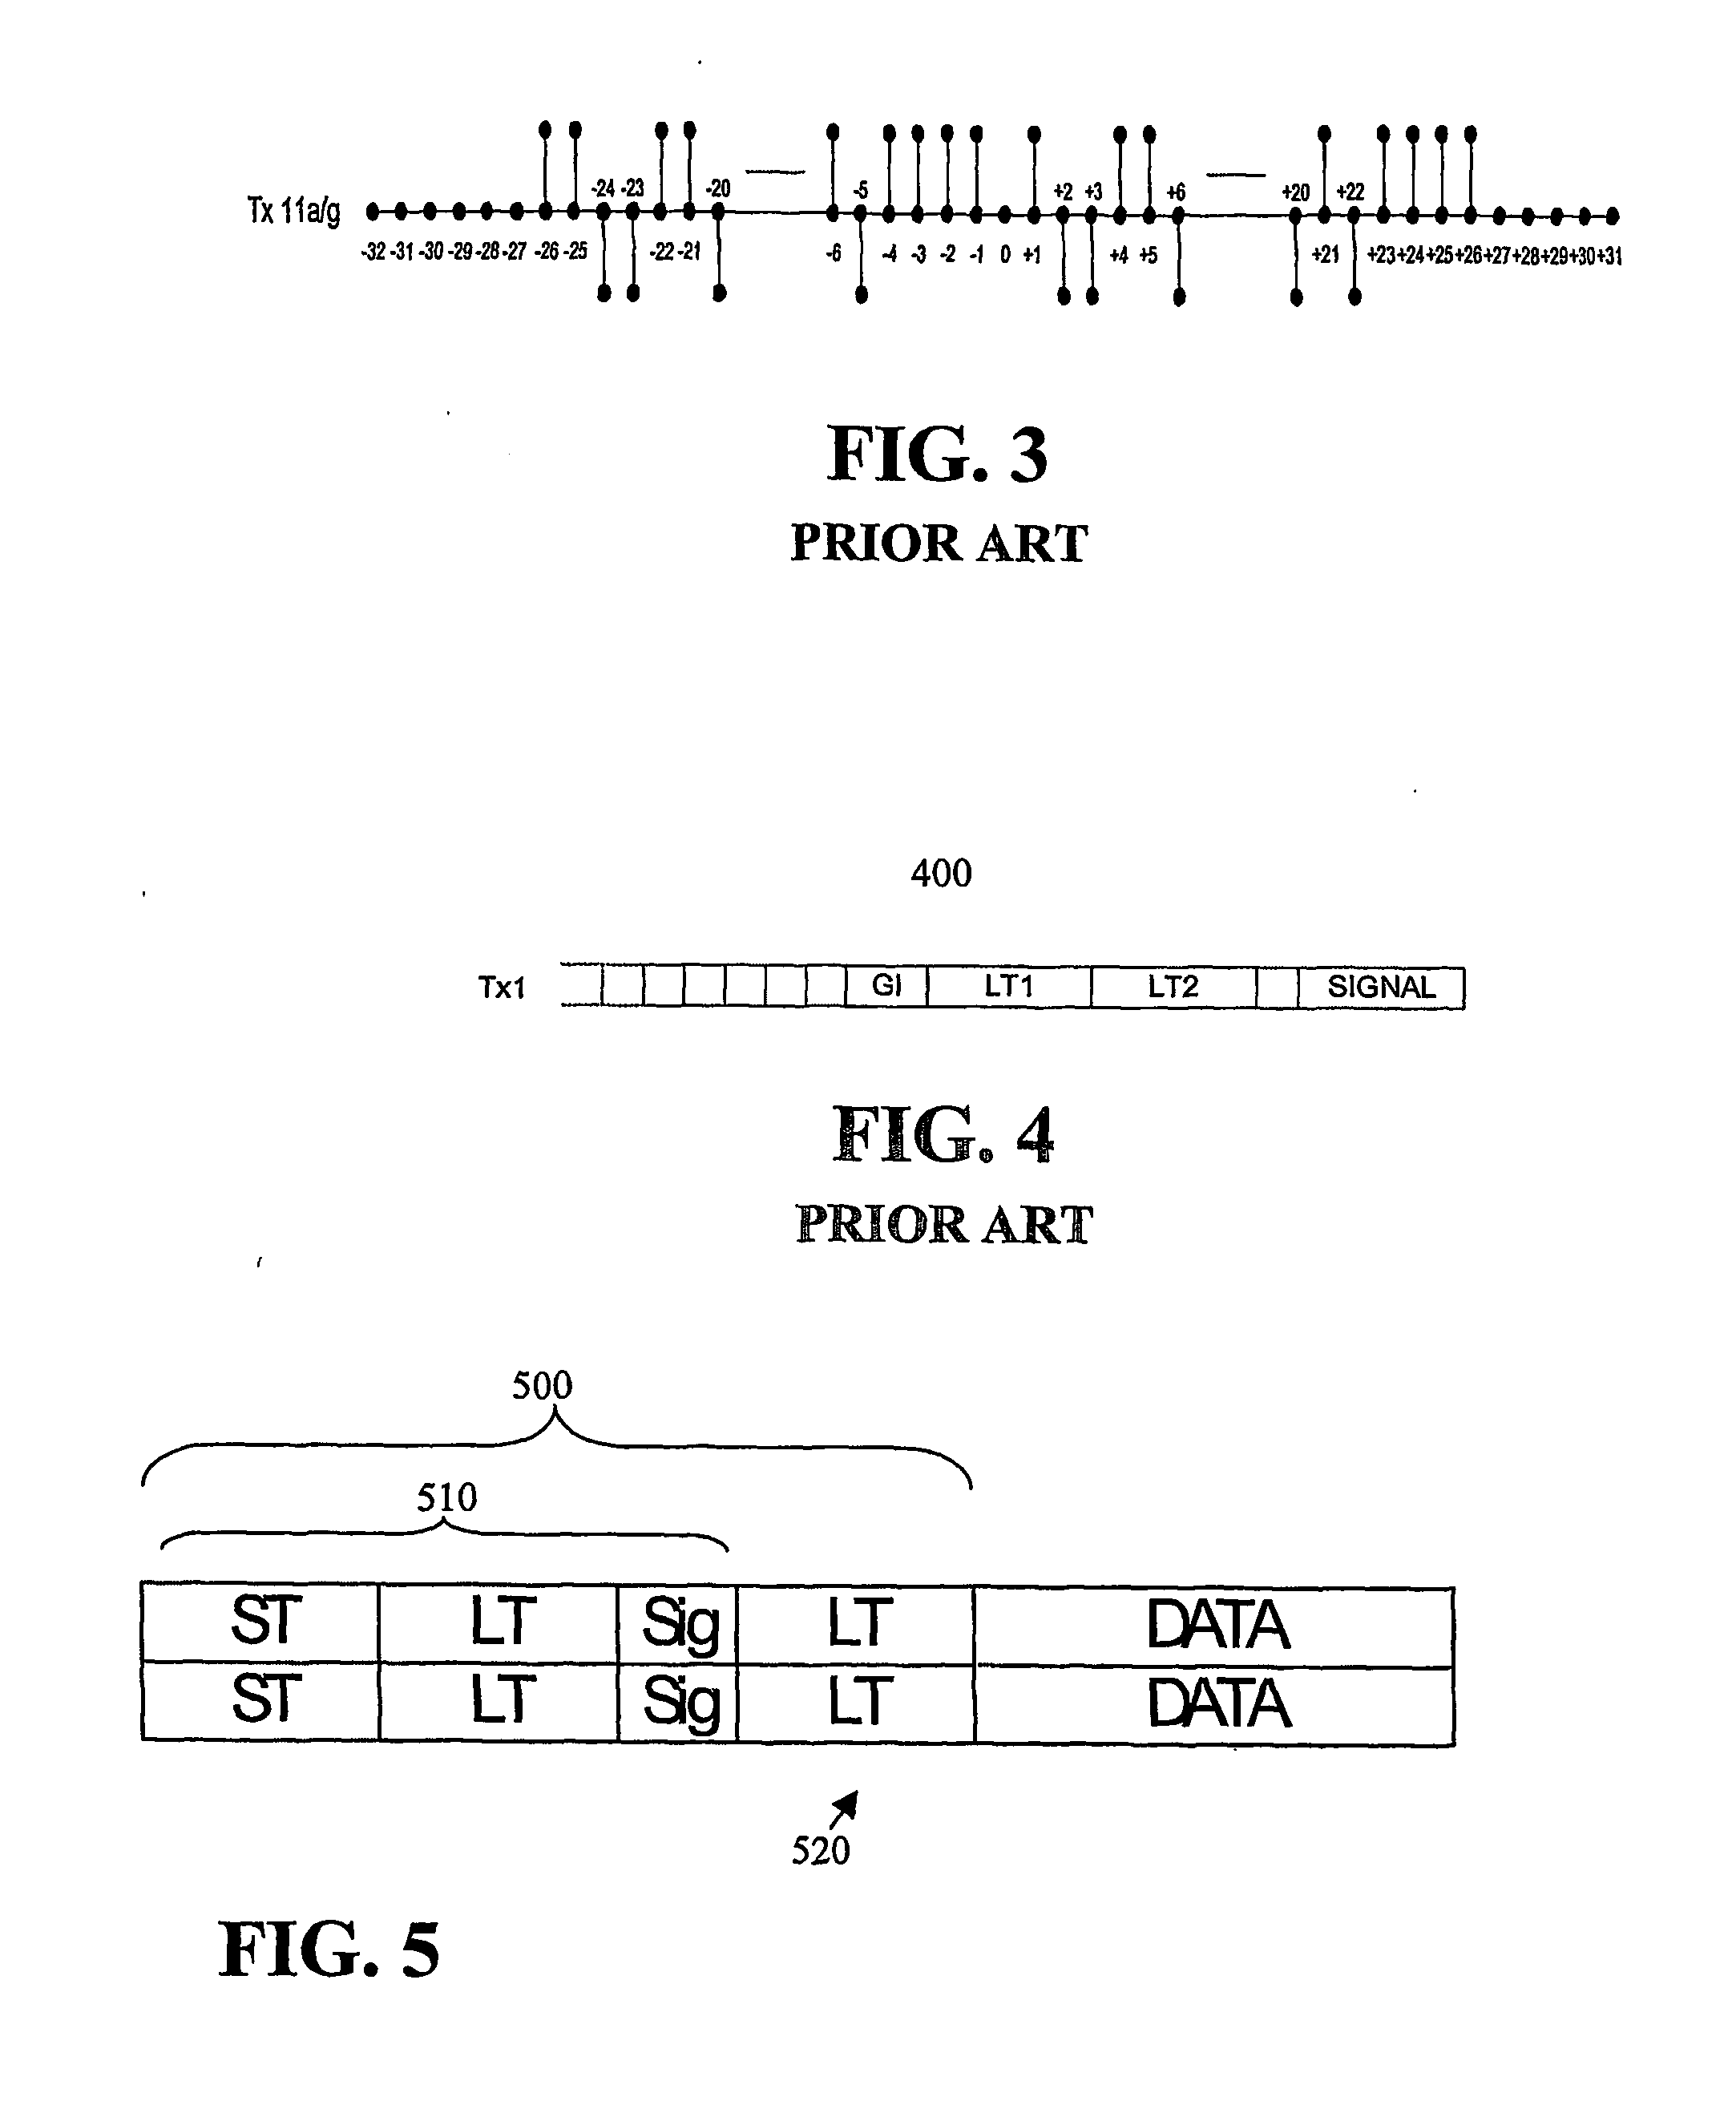 Methods and Apparatus for Backwards Compatible Communication in a Multiple Antenna Communication System Using Fmd-Based Preamble Structures